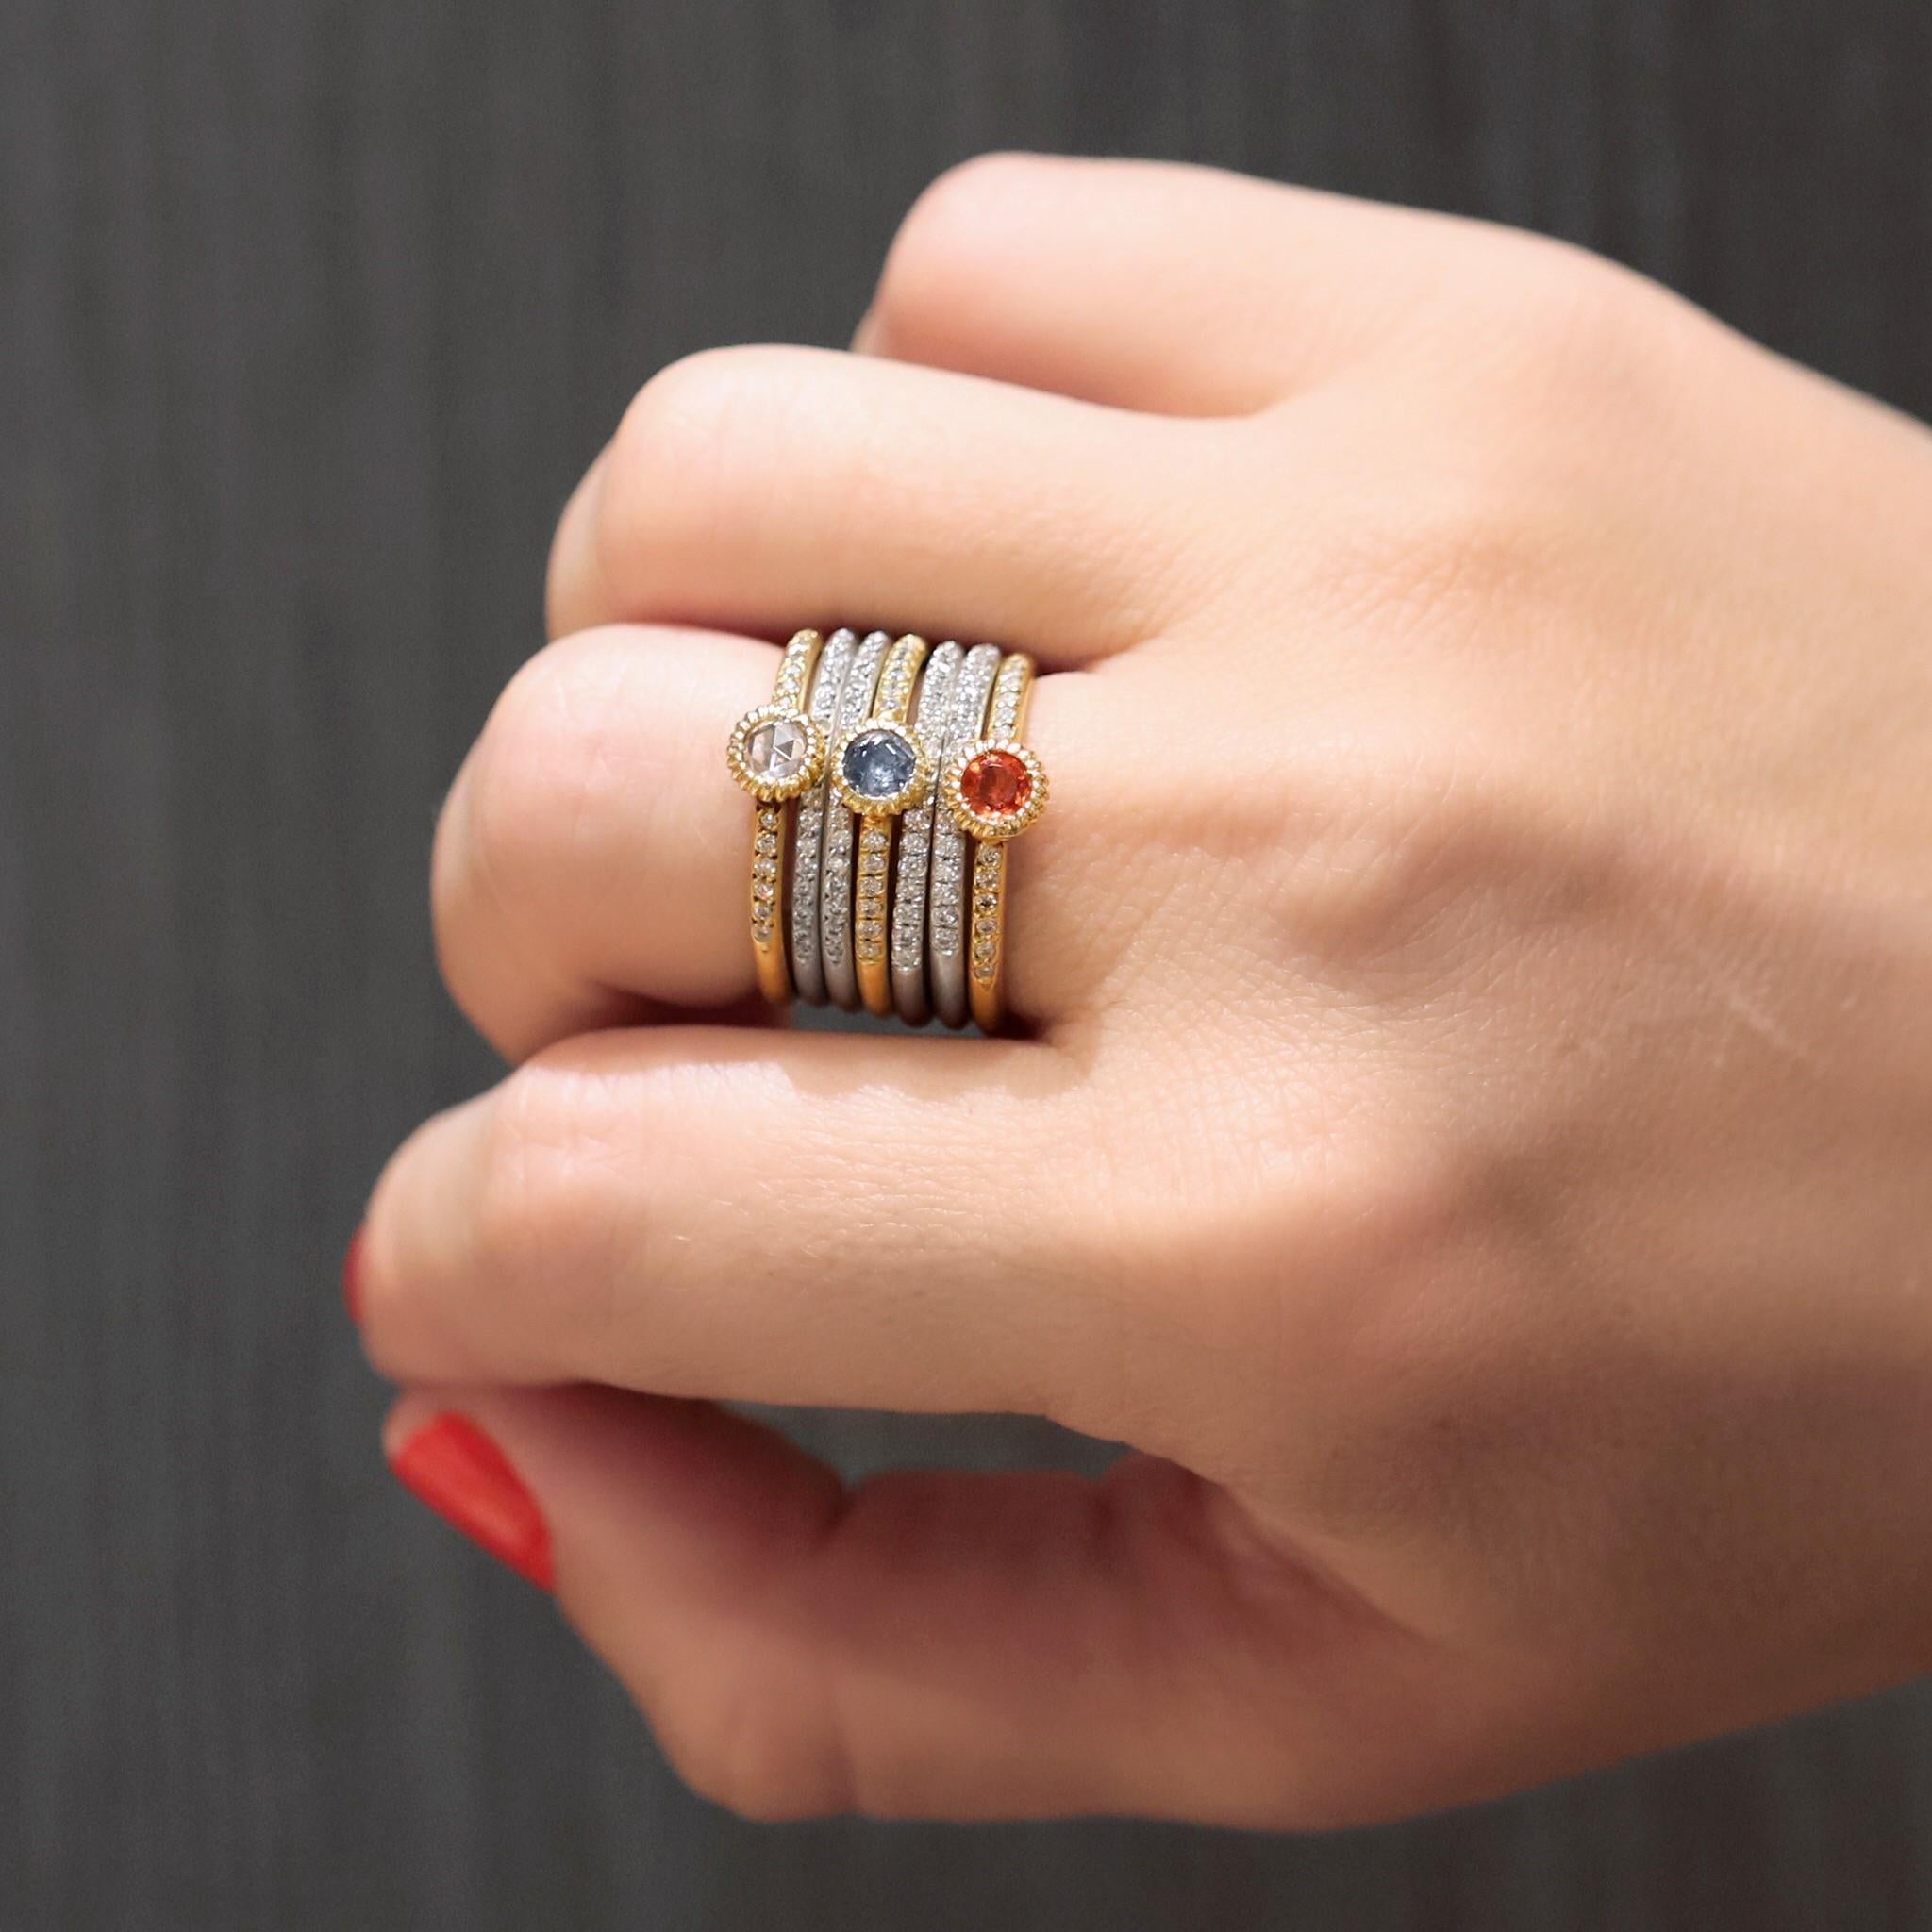 Multicolored Stacking Rings by jewelry designer Lauren K. hand-fabricated in matte-finished 18k yellow gold and matte-finished 18k white gold. The 18k yellow gold bands showcase a 0.20 carat round rose-cut white diamond, a 0.26 carat round orange